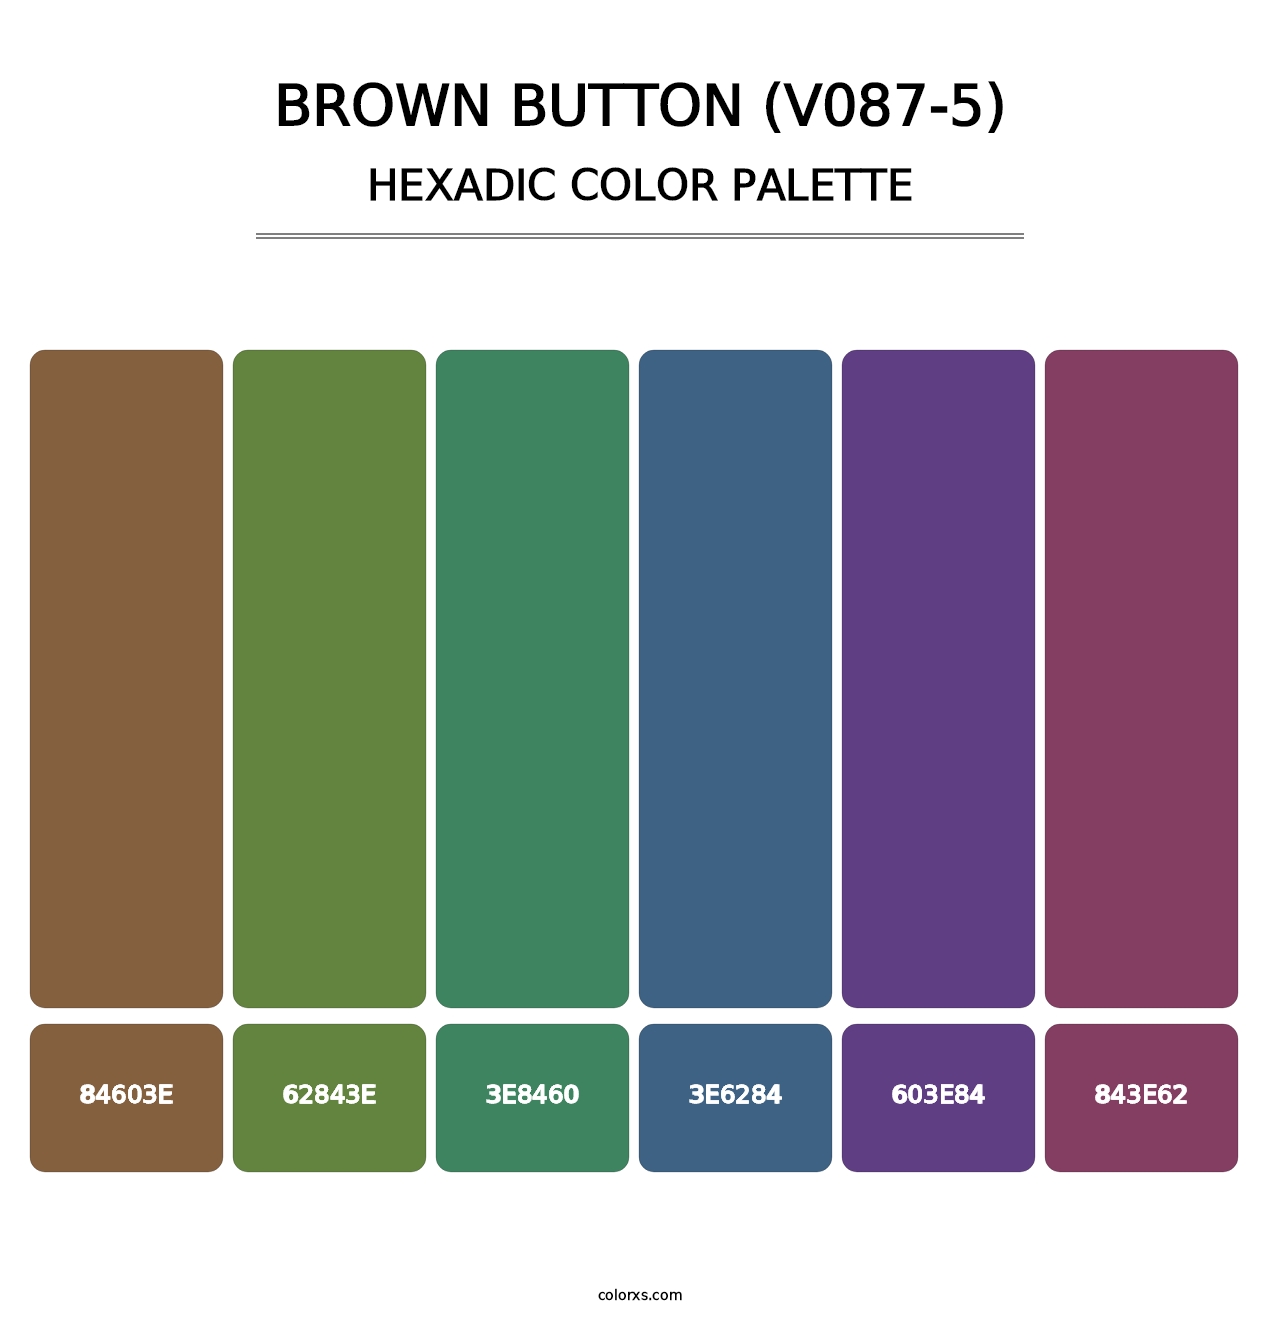 Brown Button (V087-5) - Hexadic Color Palette